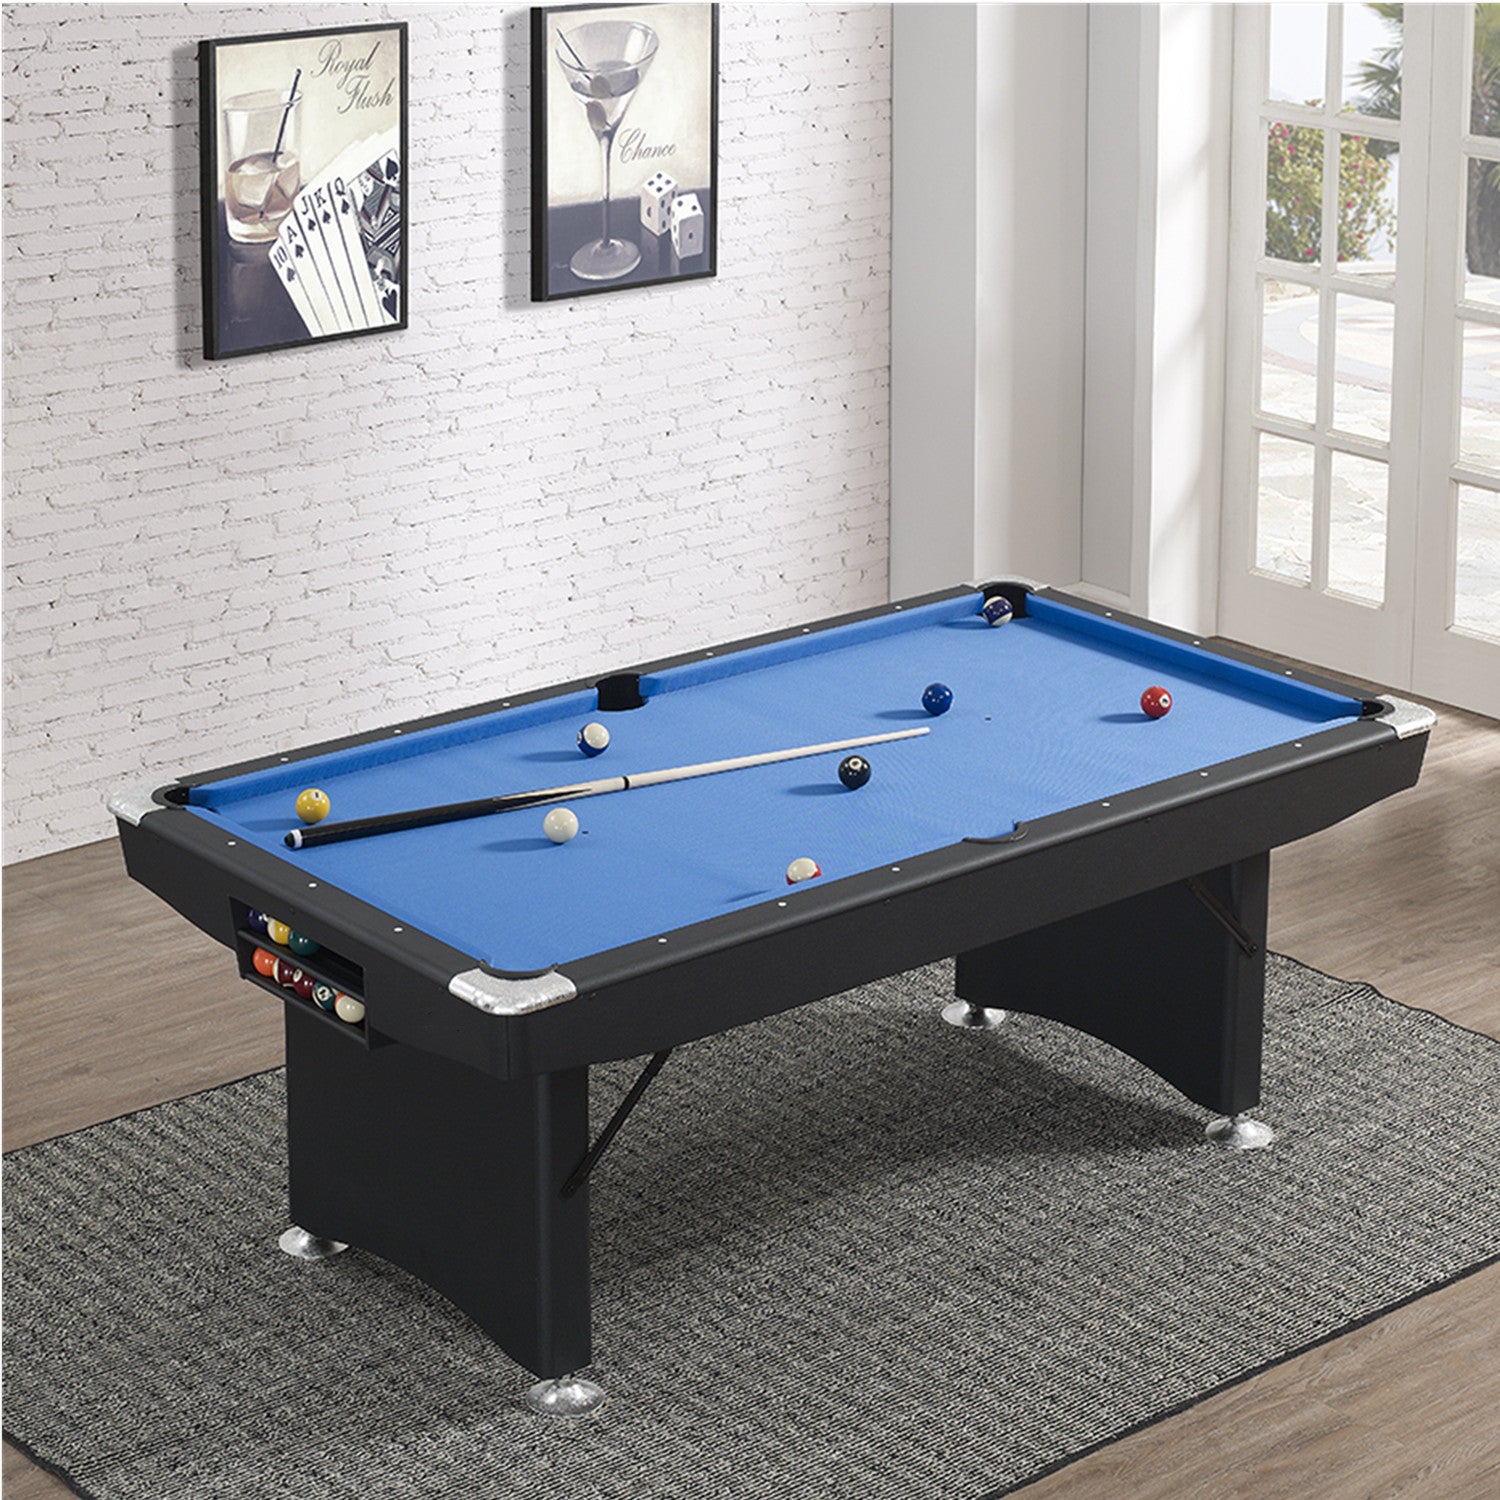 Winner 8FT Dining Pool Table-3IN1 Foldable|No Assembly Required